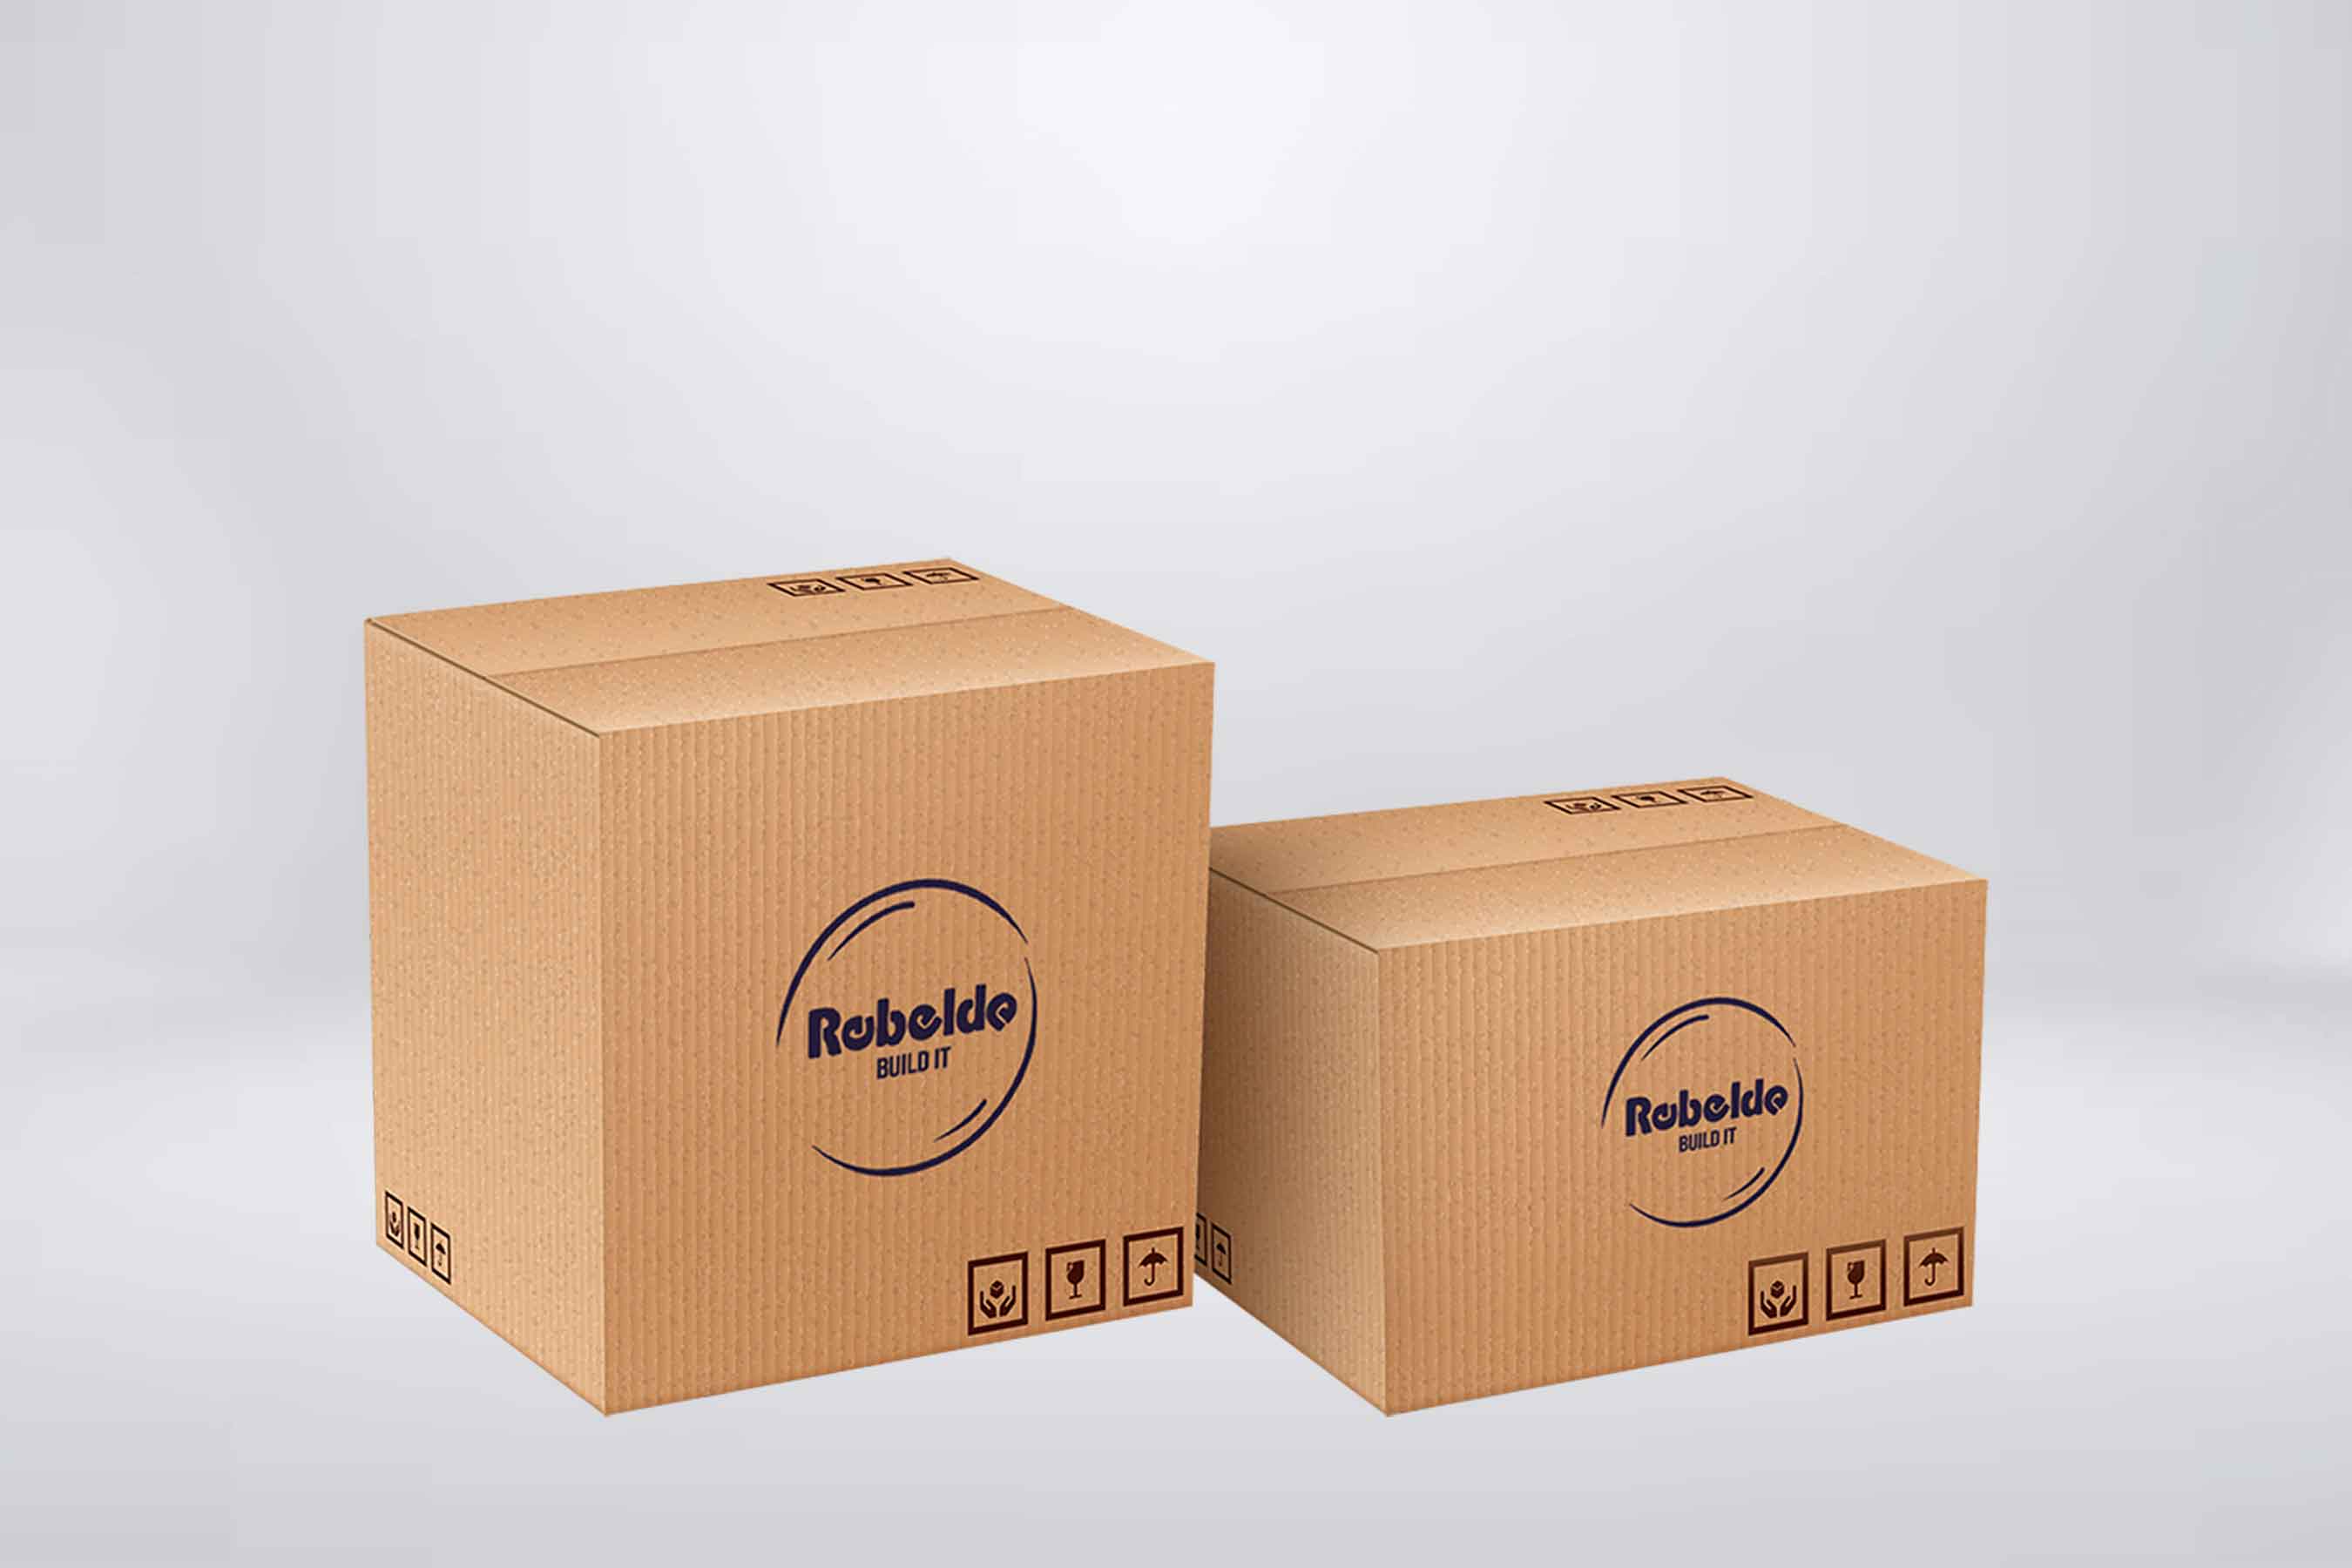 Cardboard moving box with stamping – Rebelde Build It